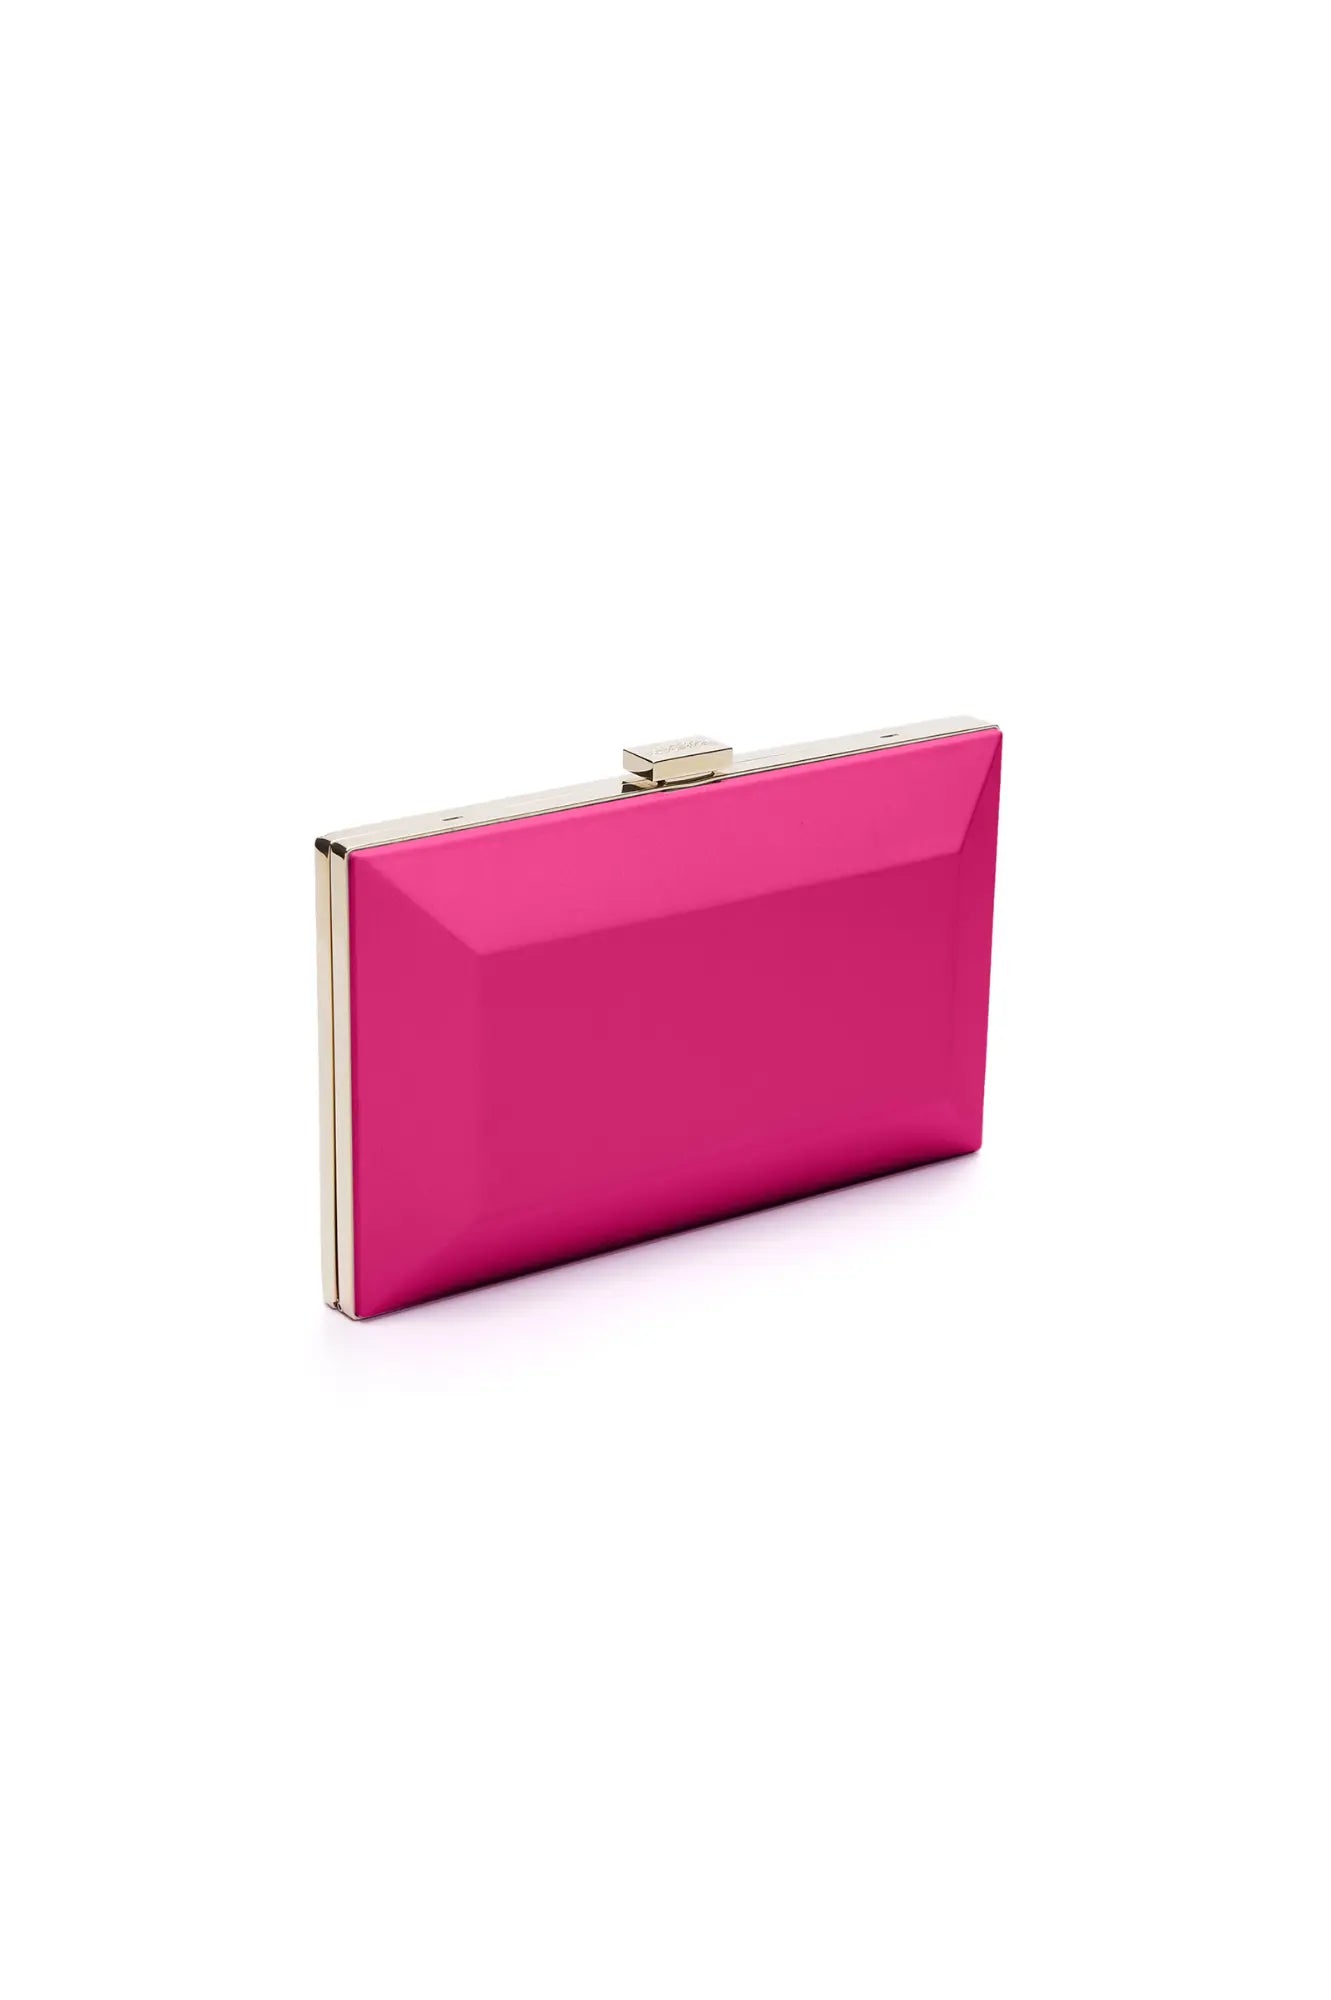 Hot pink Milan Clutch x MICAELA purse from The Bella Rosa Collection on a white background.